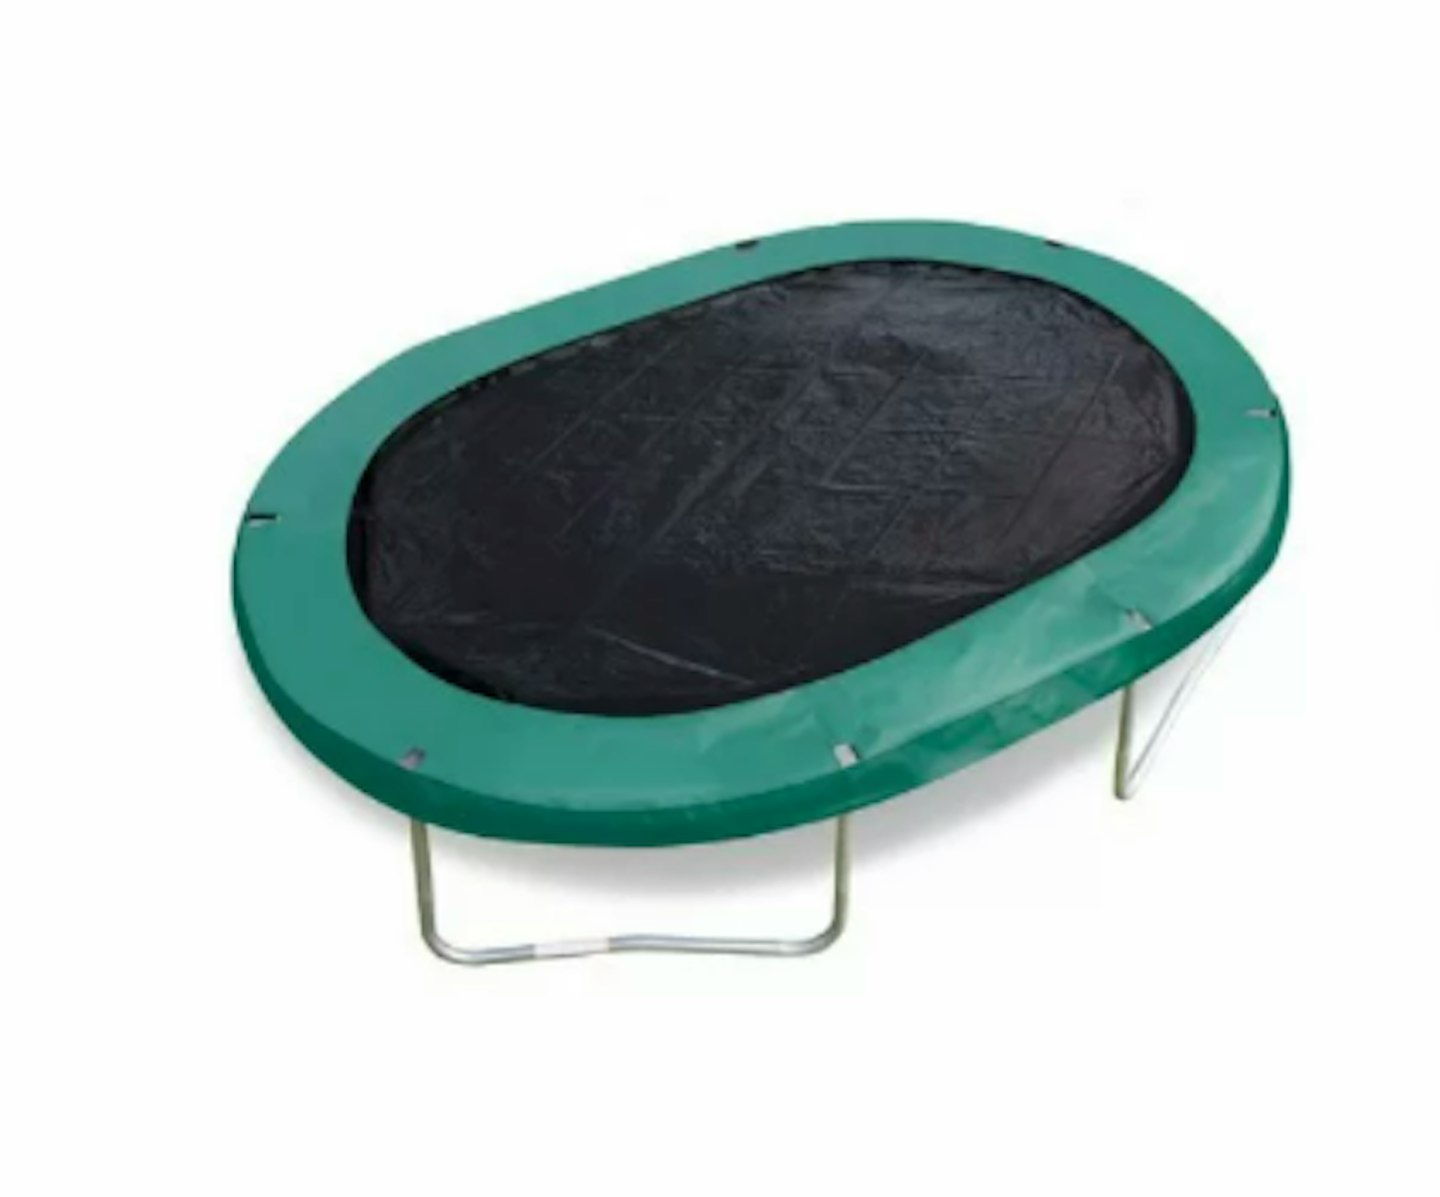 Jumpking Oval Trampoline Cover